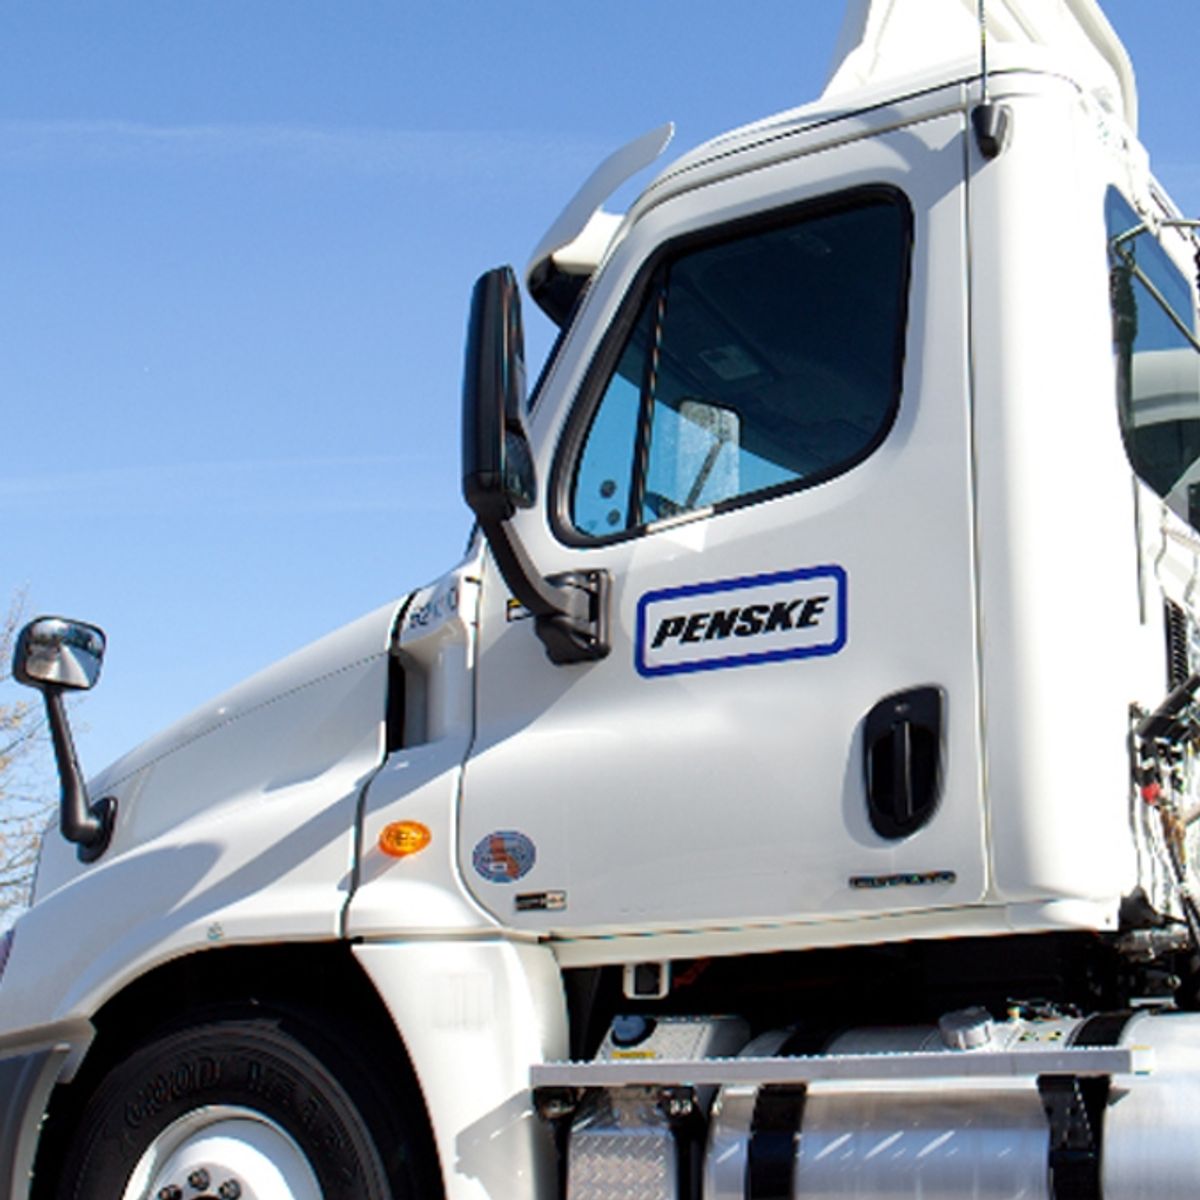 Penske Logistics to Present at Penn State Supply Chain Event